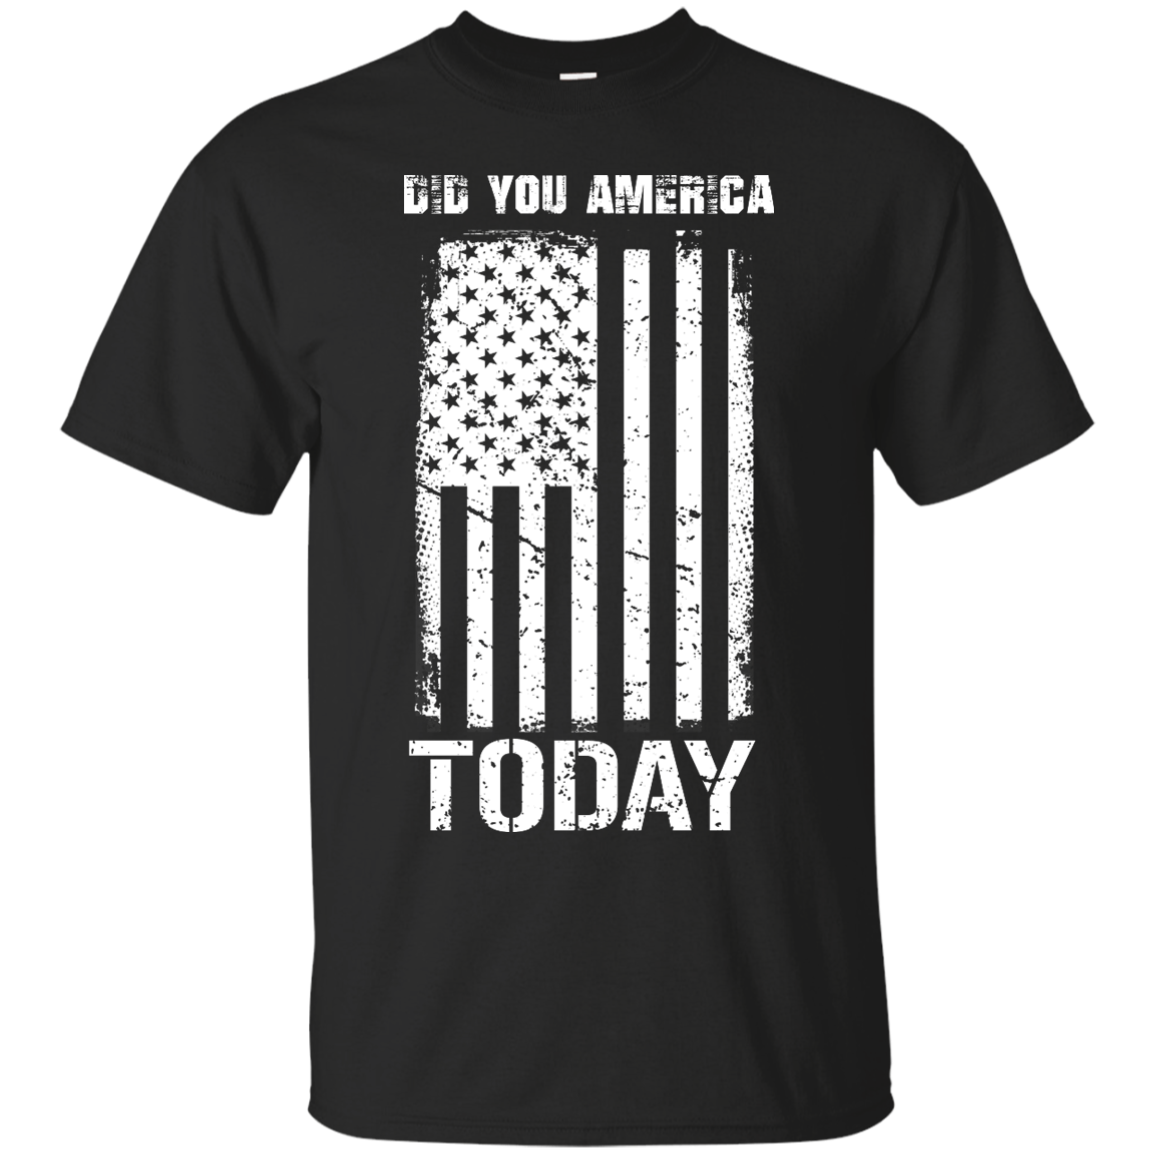 Did You America Today T-Shirts, Hoodies, Tank Top